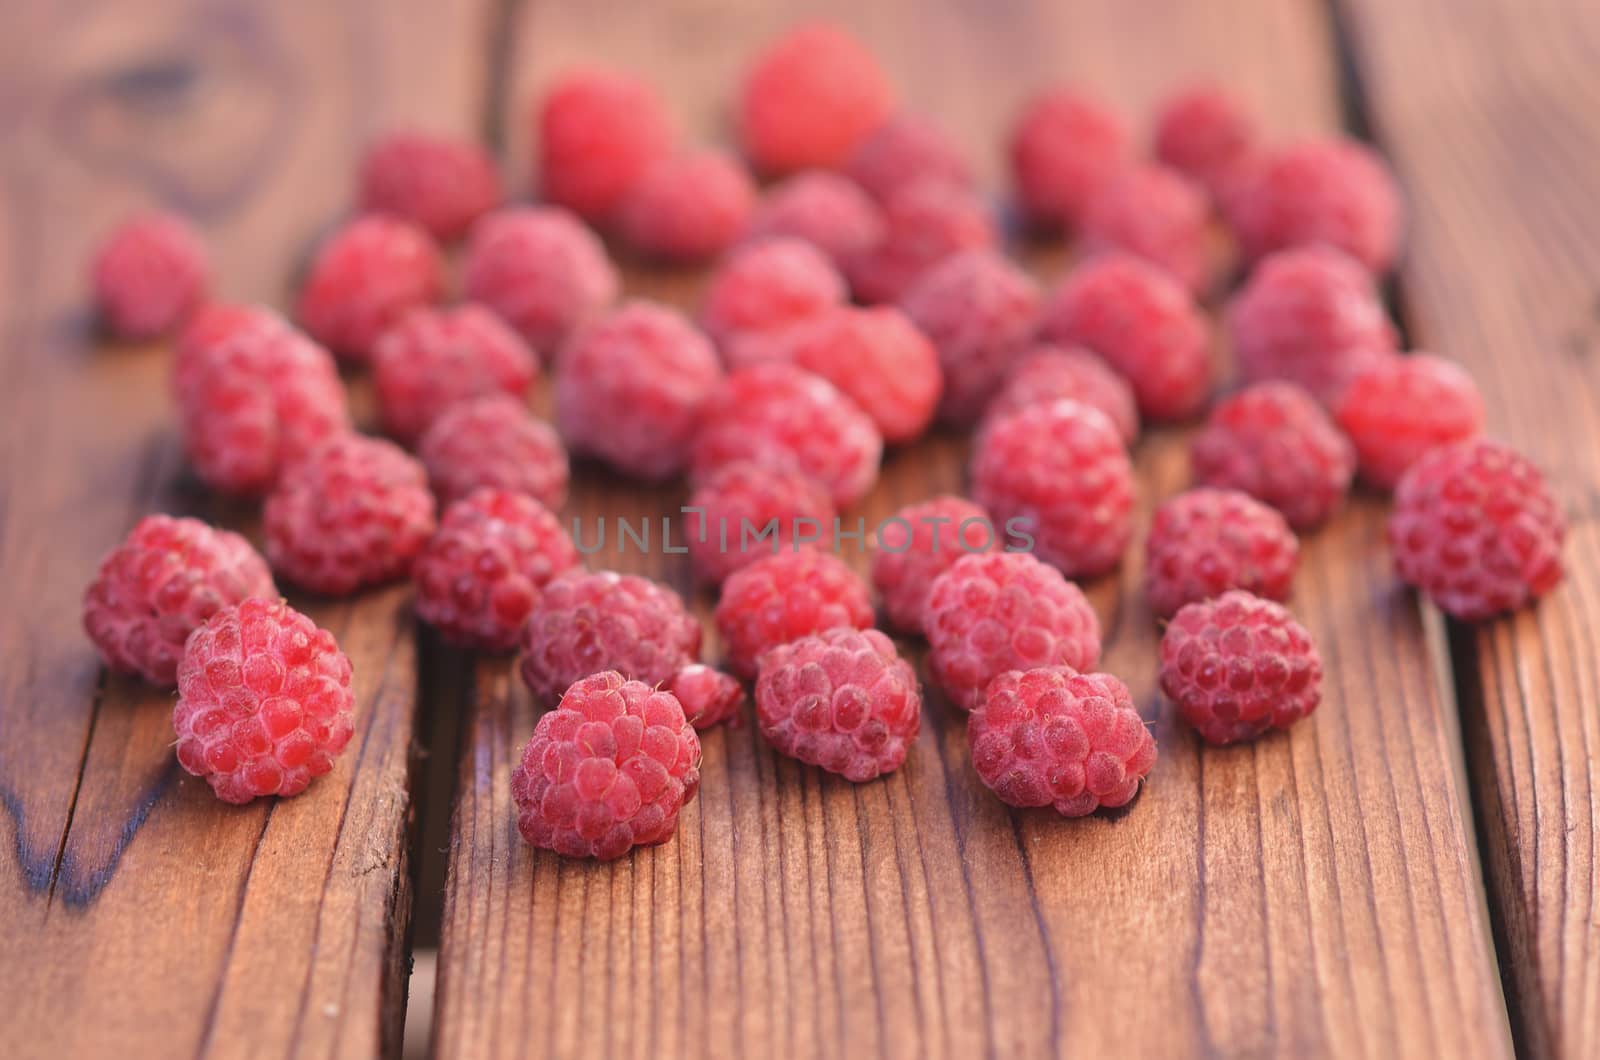 On a wooden background, raspberries spread across the plane, photos on the side